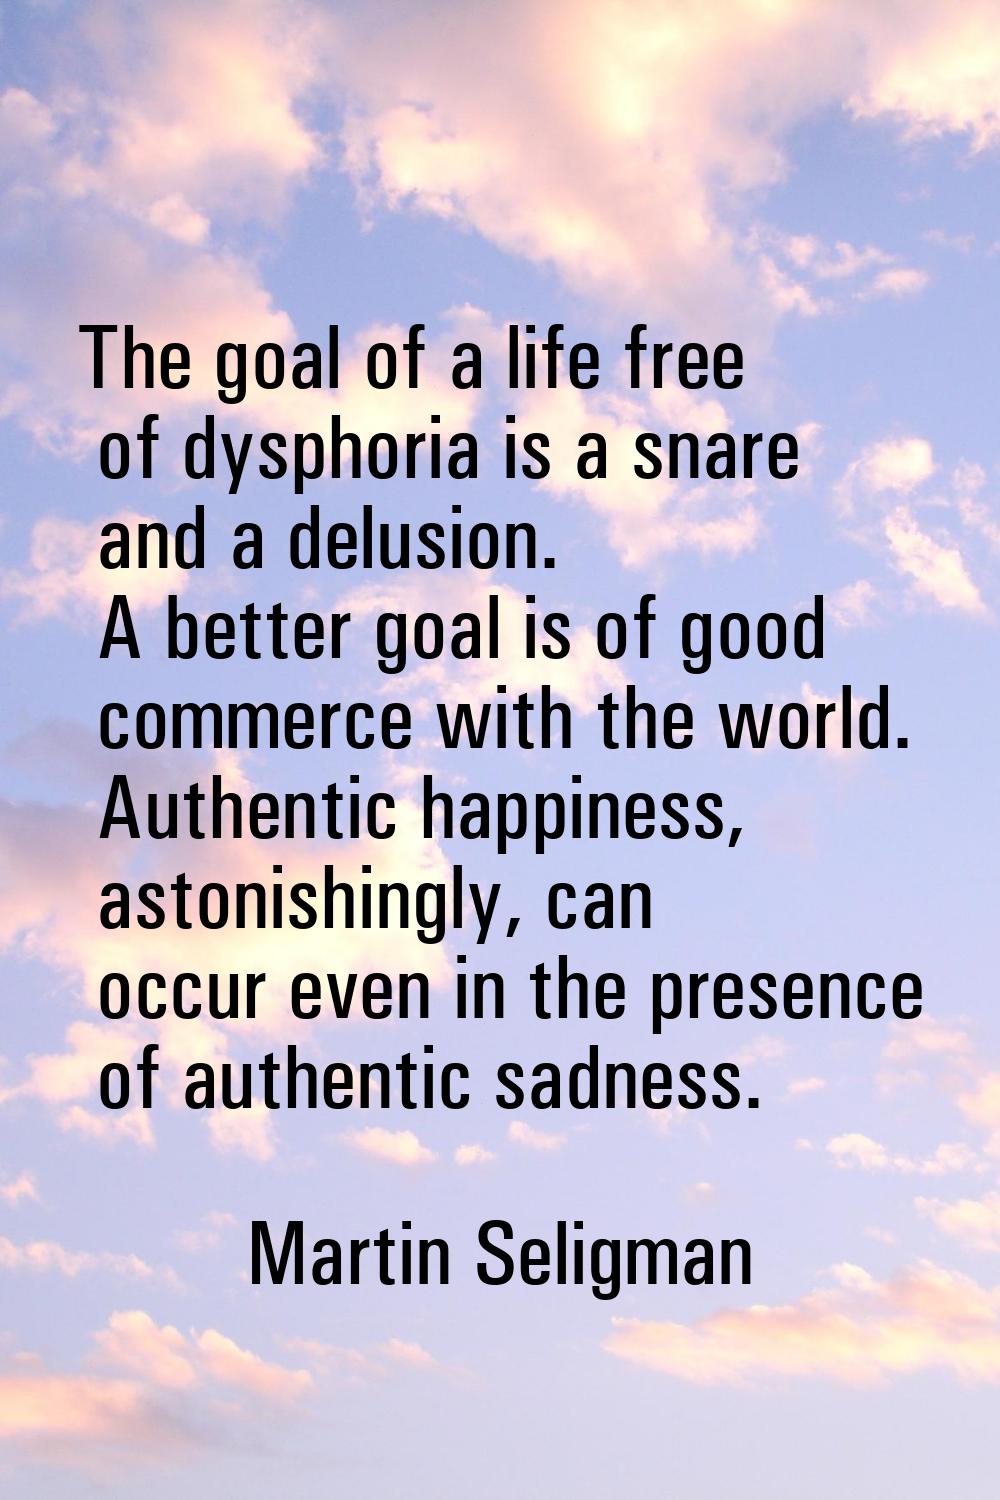 The goal of a life free of dysphoria is a snare and a delusion. A better goal is of good commerce w